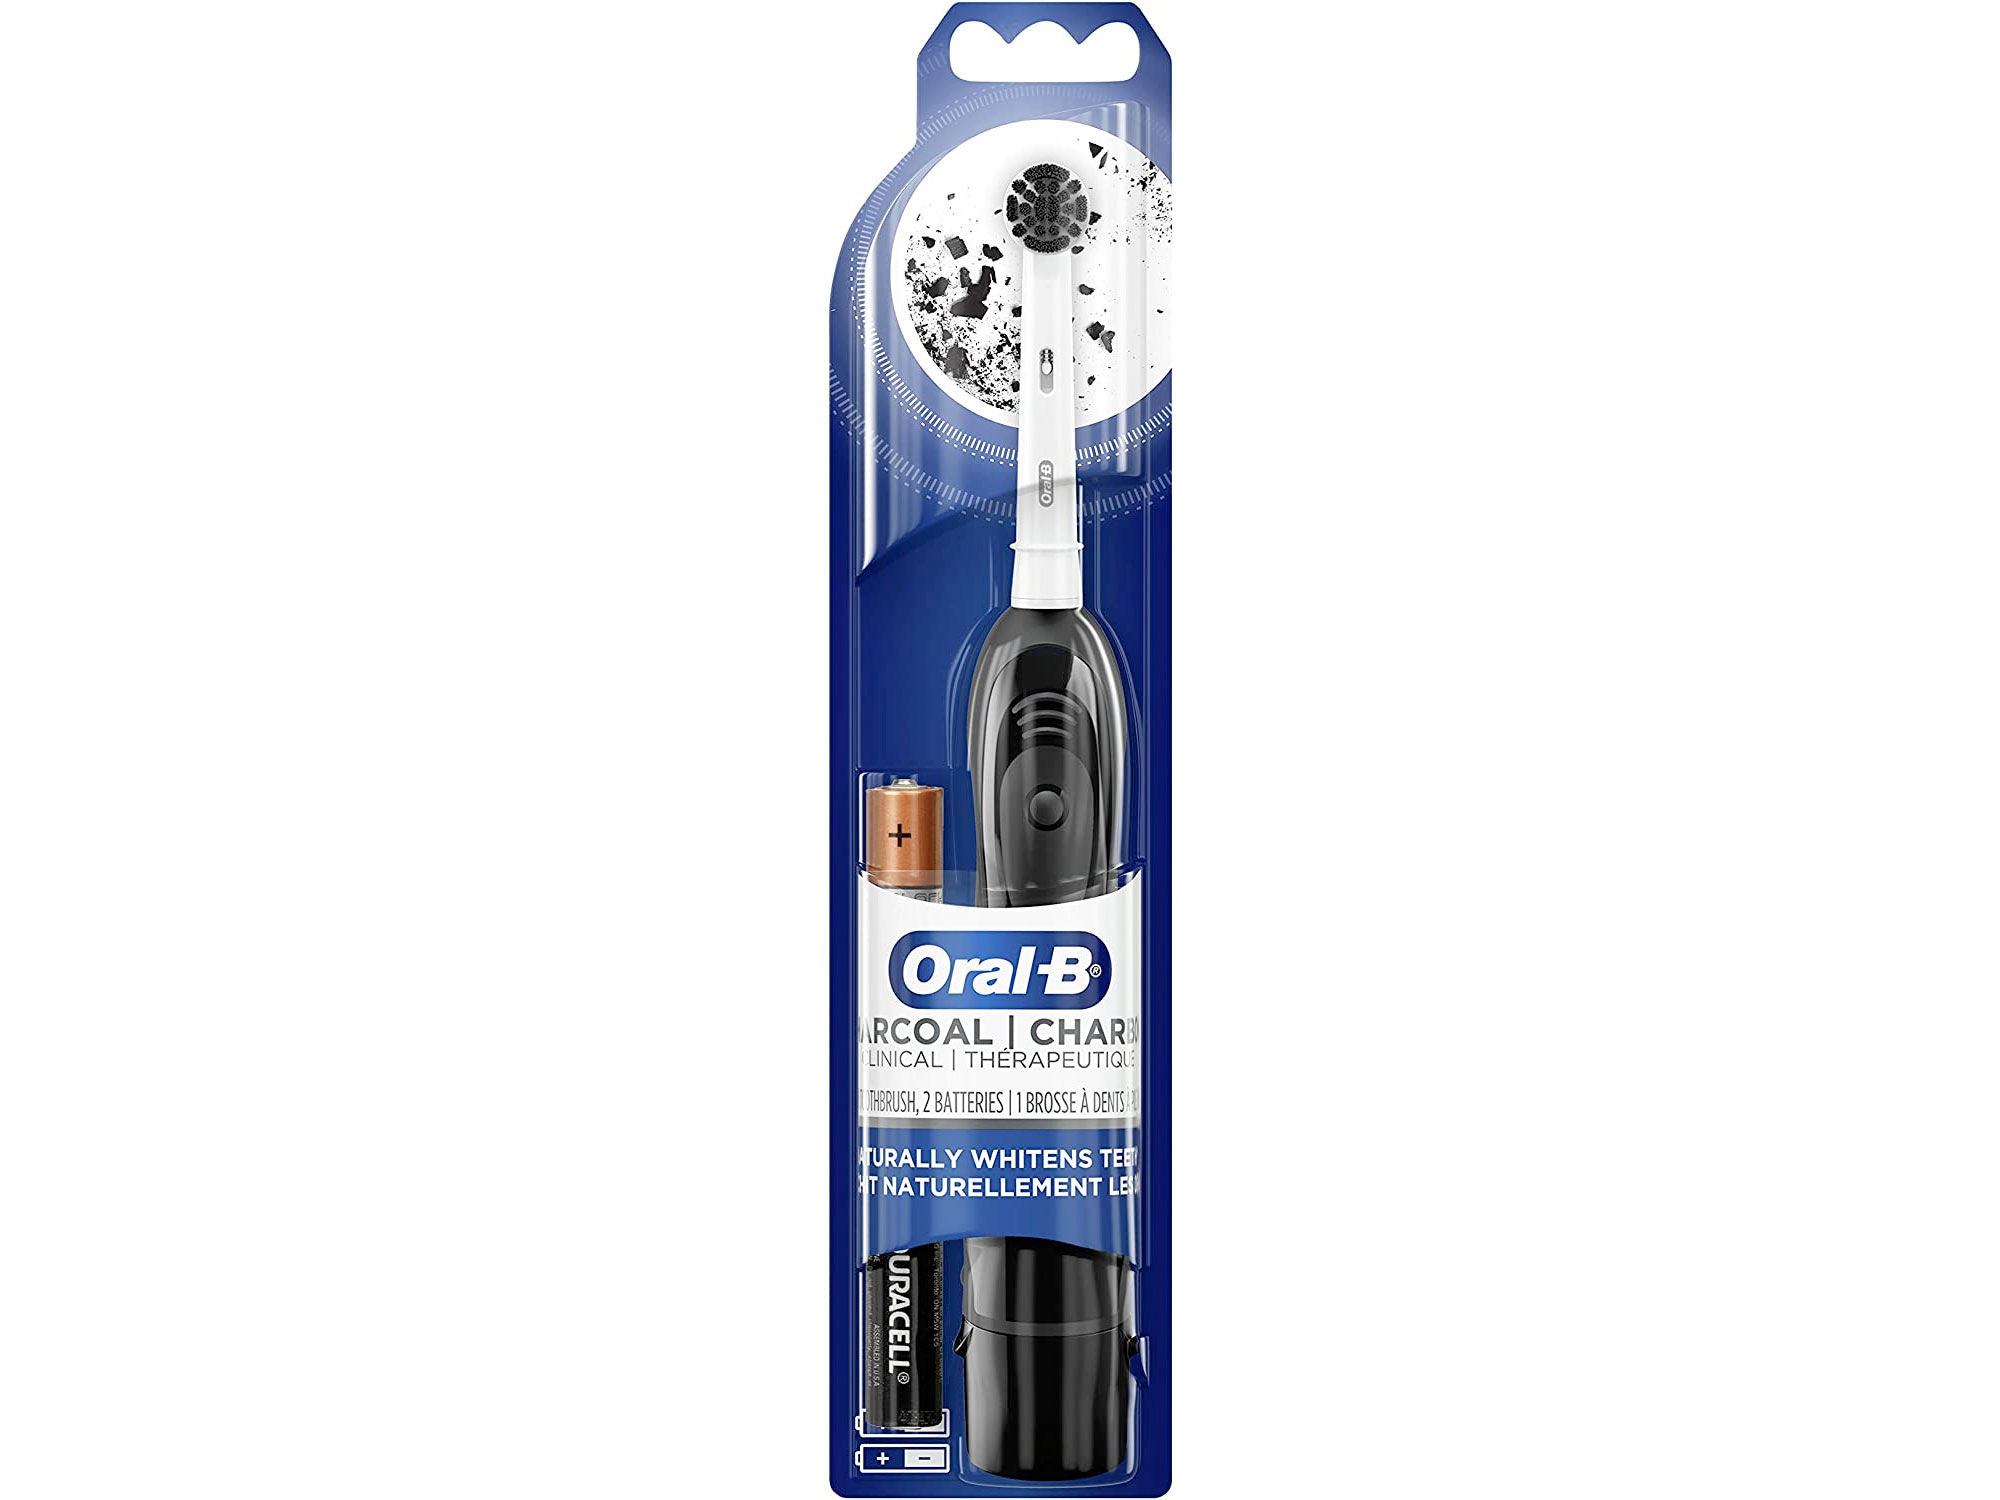 Amazon：Oral-B Power Clinical Charcoal Battery Powered Toothbrush只卖$6.98